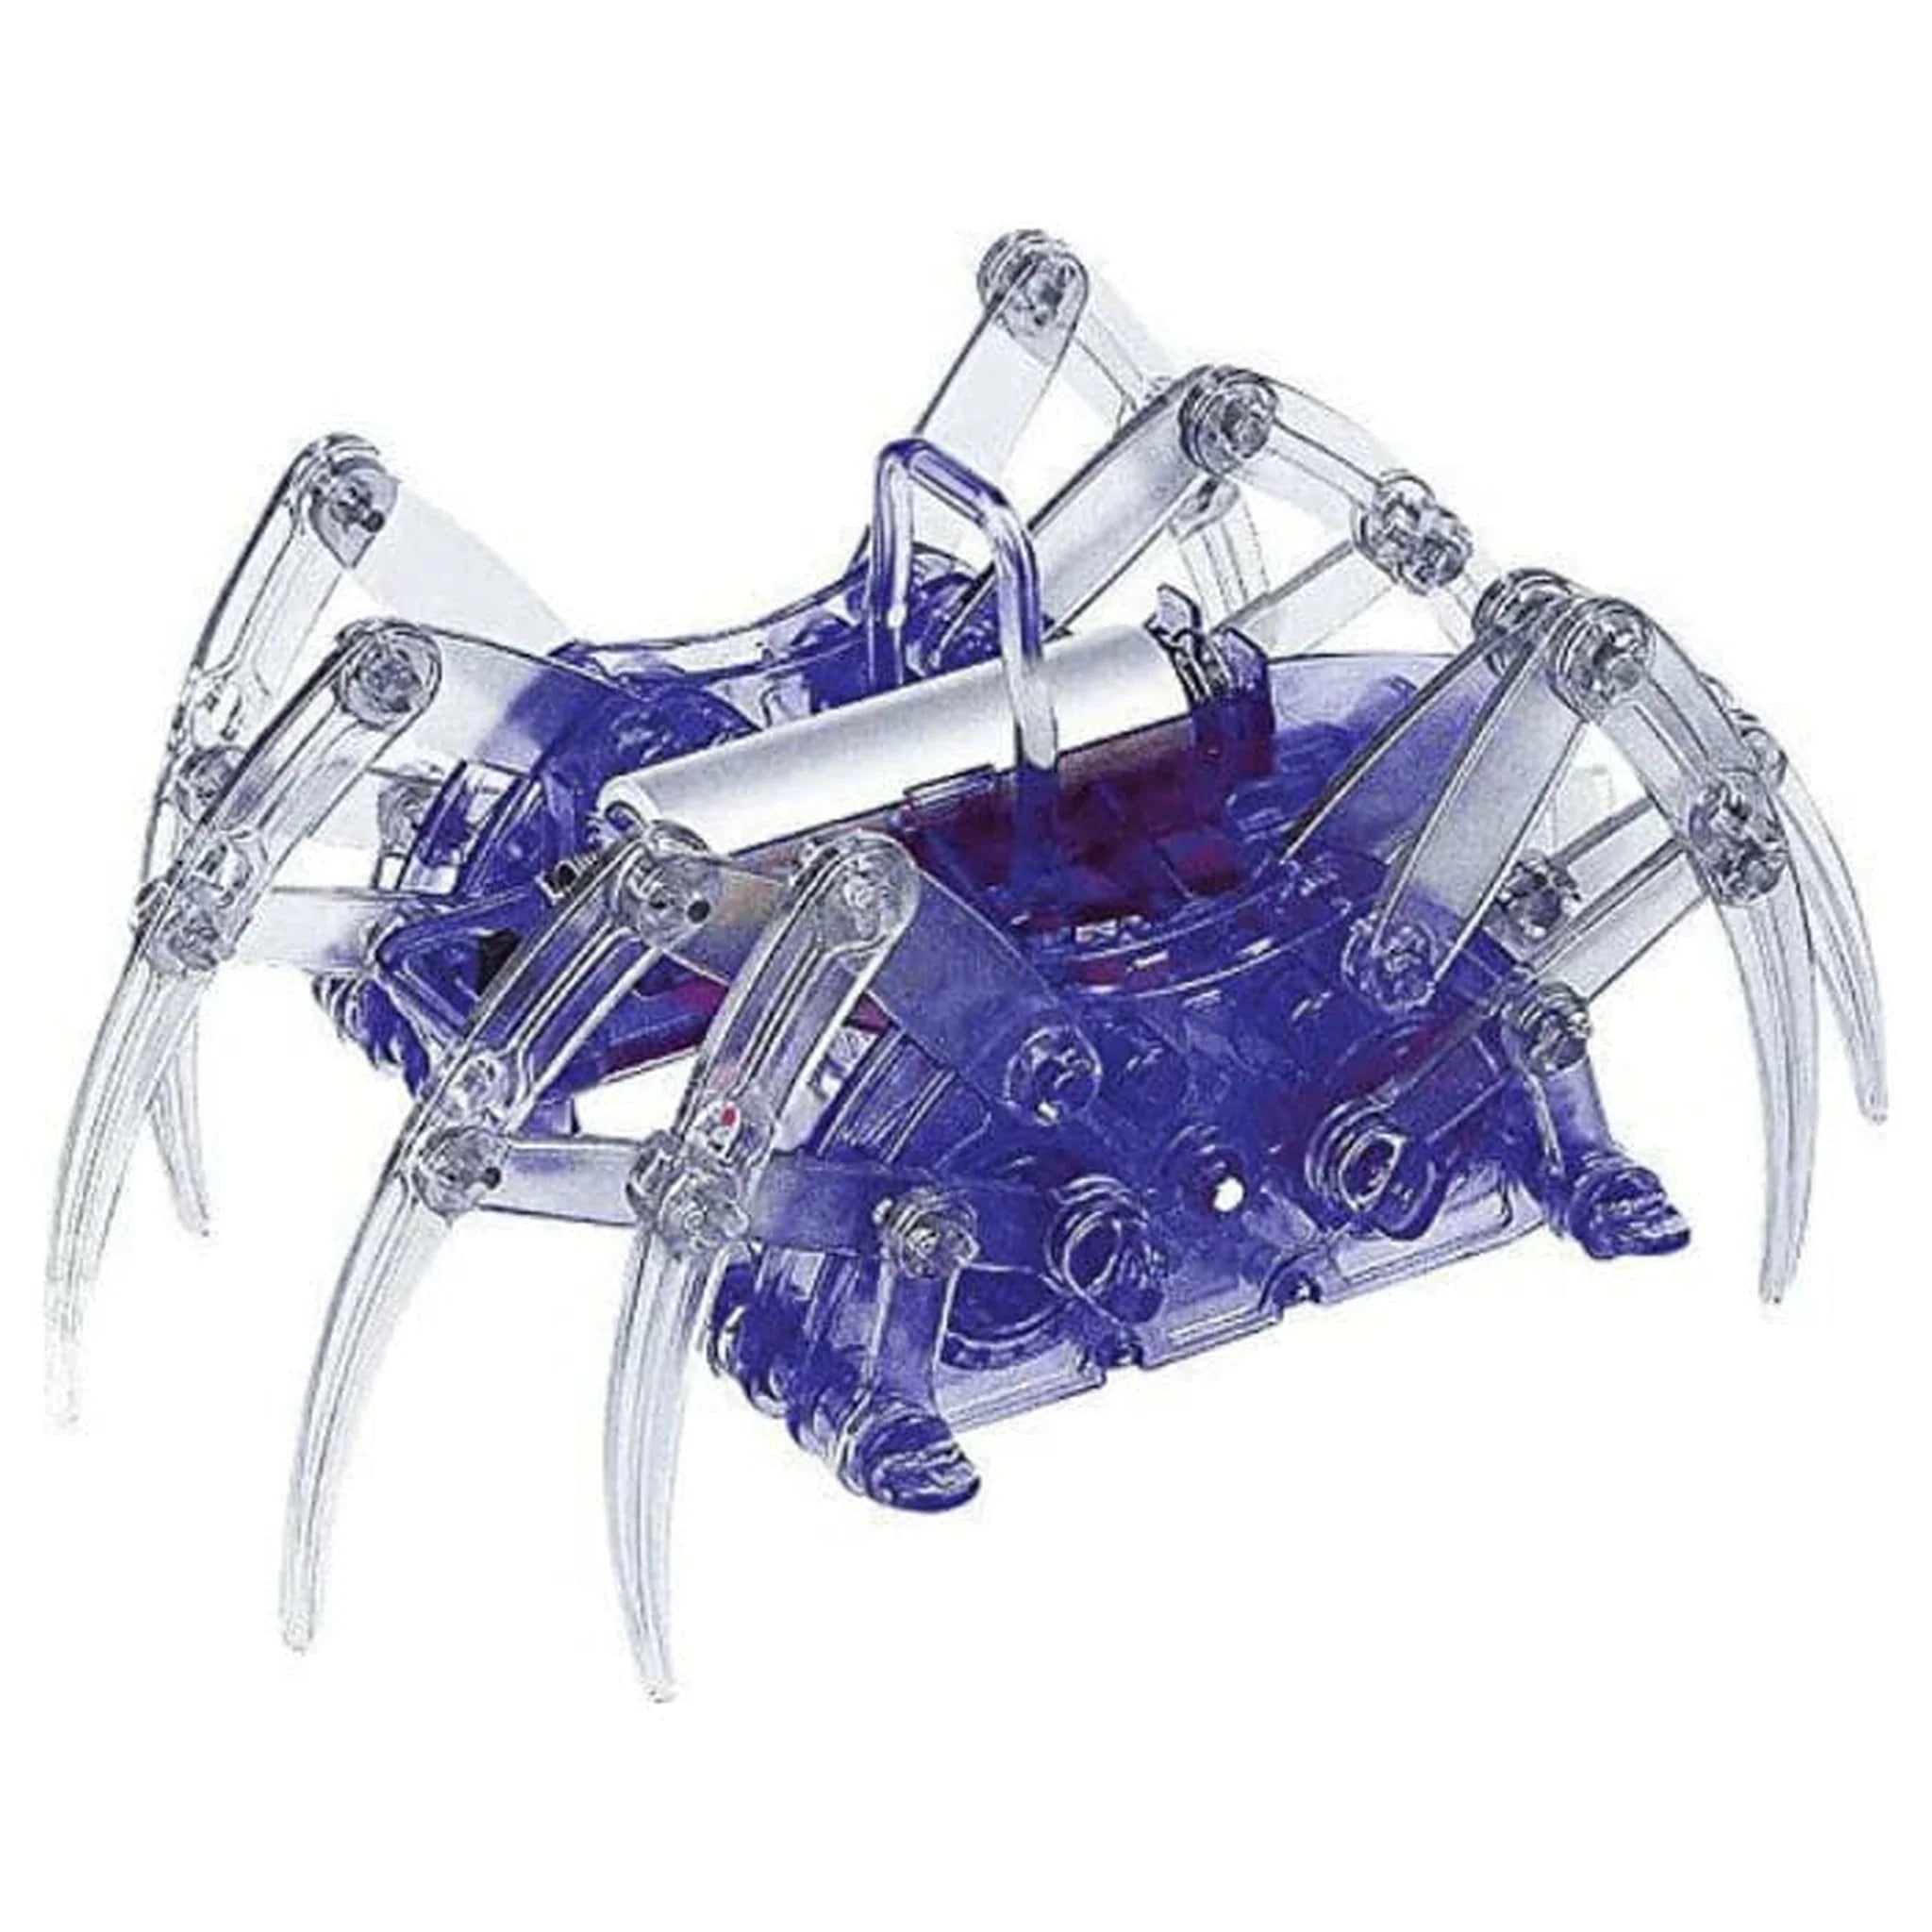 Educational Toy Spider Robot Science Kit - Kids Party Craft